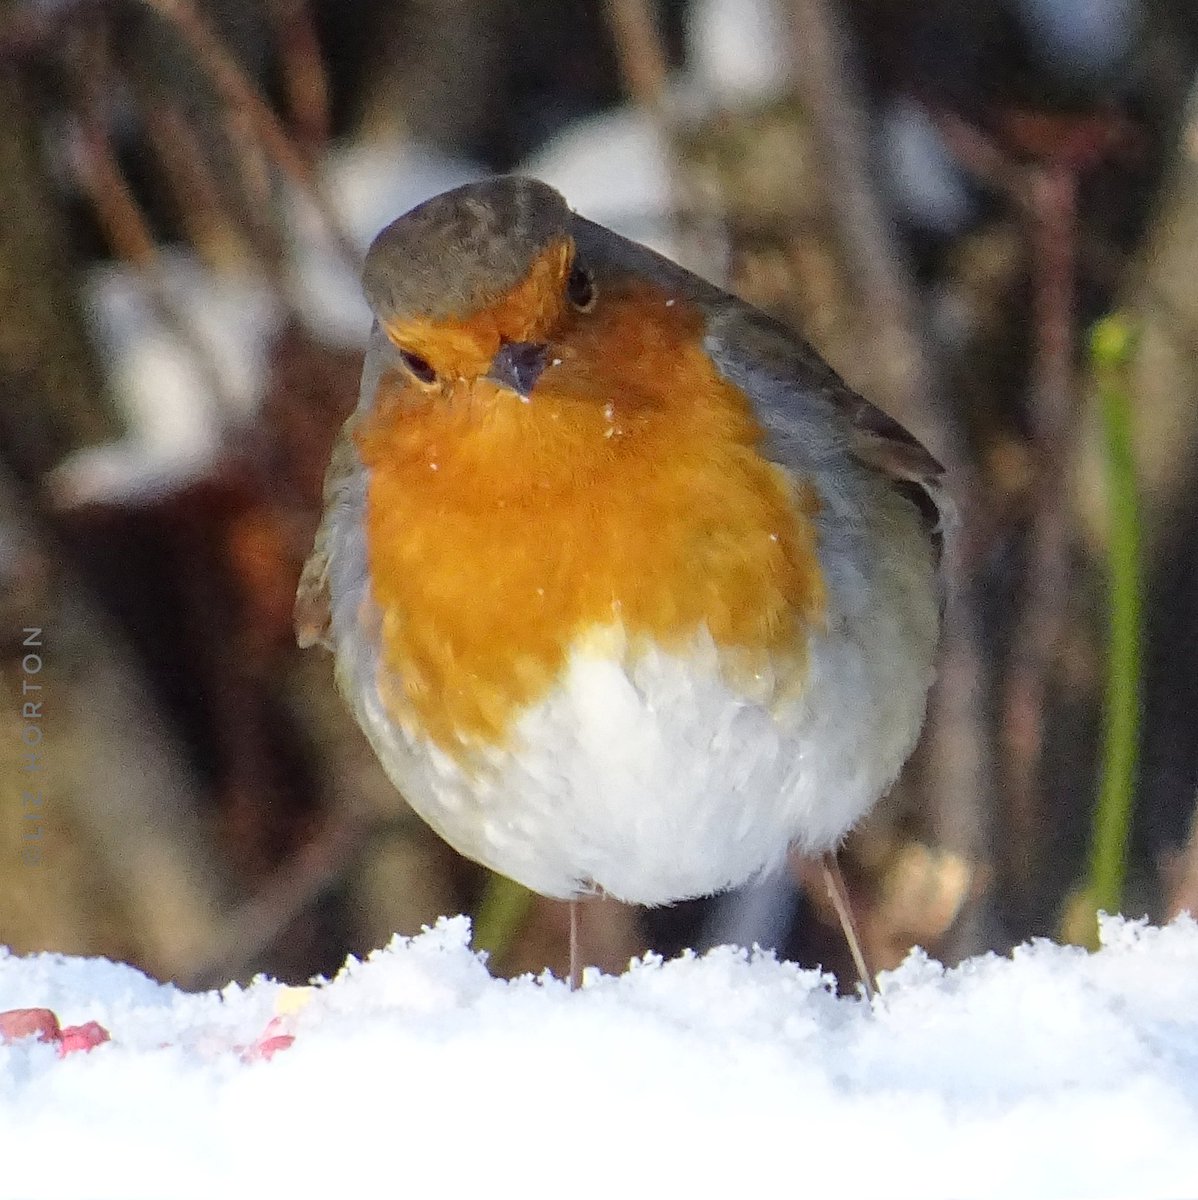 'Nothing in the world is quite as adorably lovely as a #robin..' 🥰
Frances Hodgson Burnett #quote
#Winterwatch #thoughtoftheday
Have a lovely day and #weekend
Whatever you're up to..
#nature #wildlife #birds #photography
#birdwatching #birdphotography
#art #naturelovers .. 🧡🕊